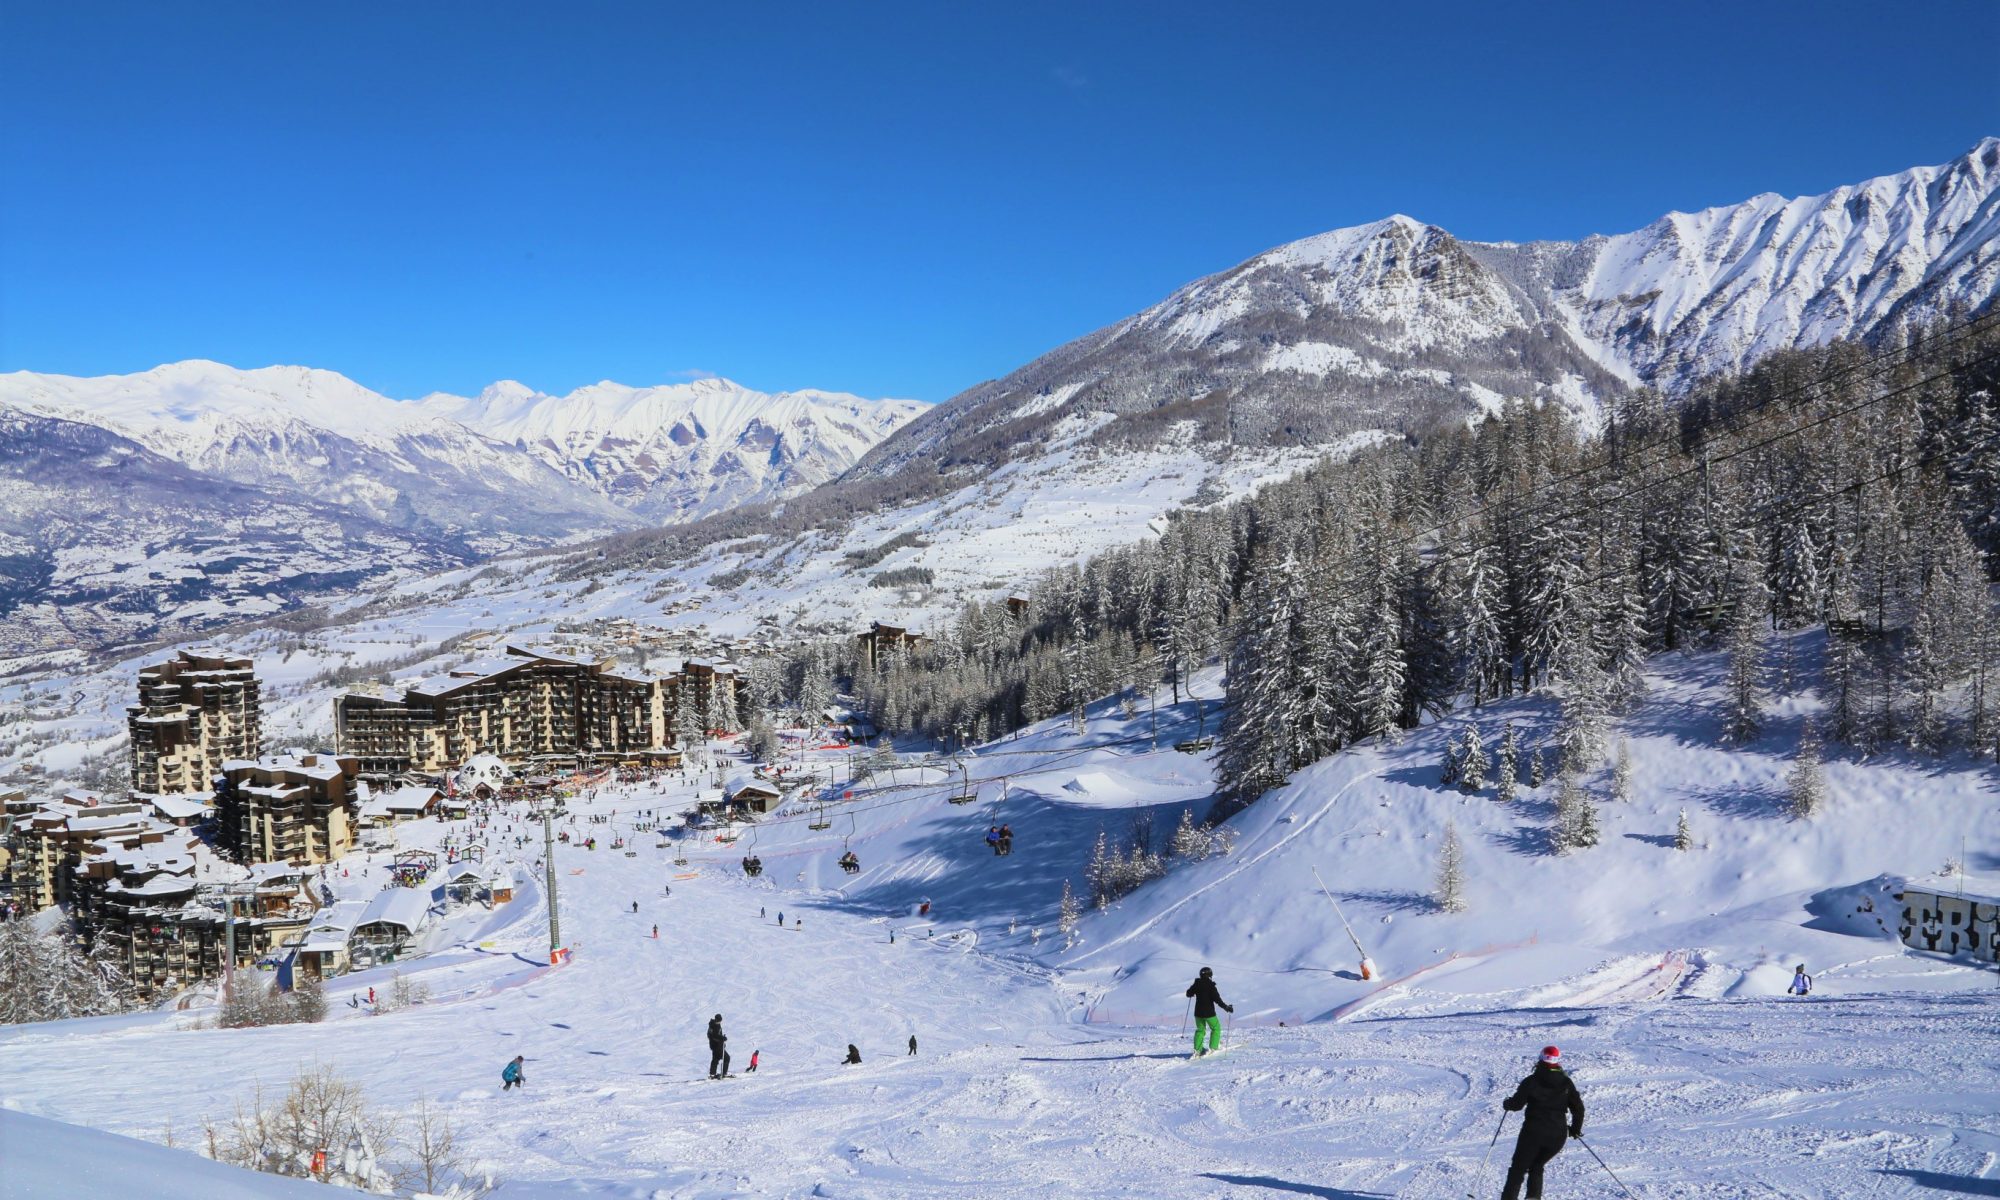 View of a small & quiet skiing village resort during the winter season.